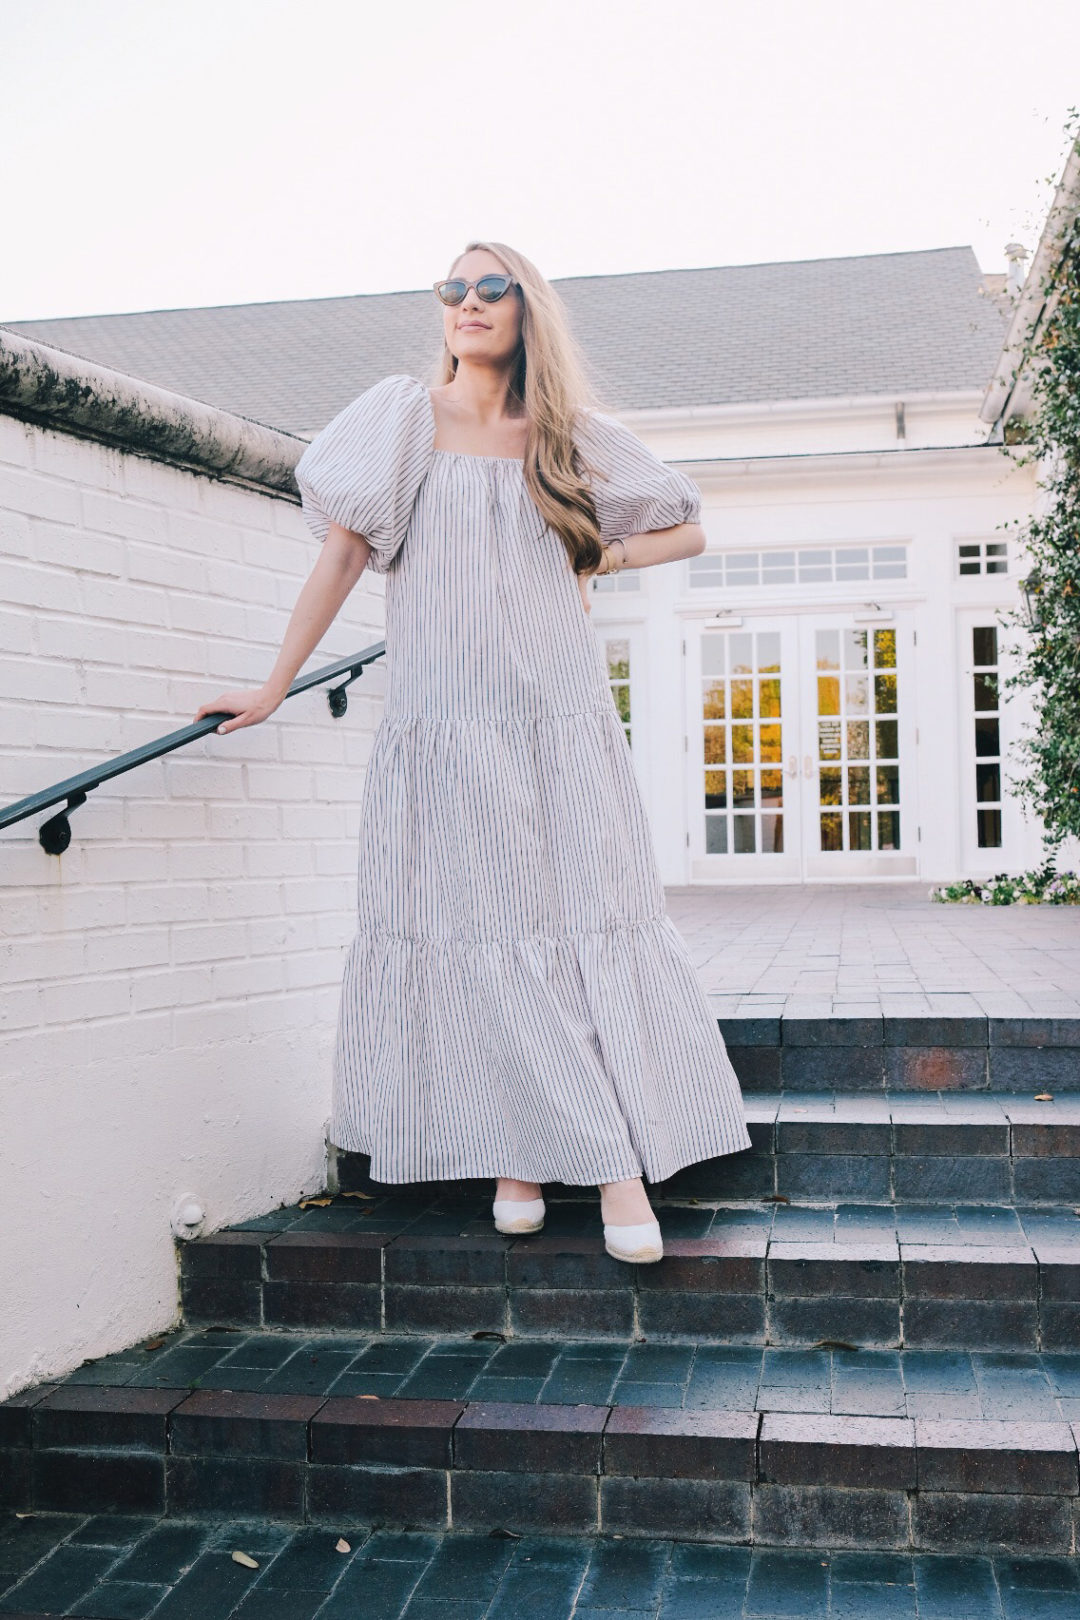 Statement sleeves maxi dress | Miss Madeline Rose